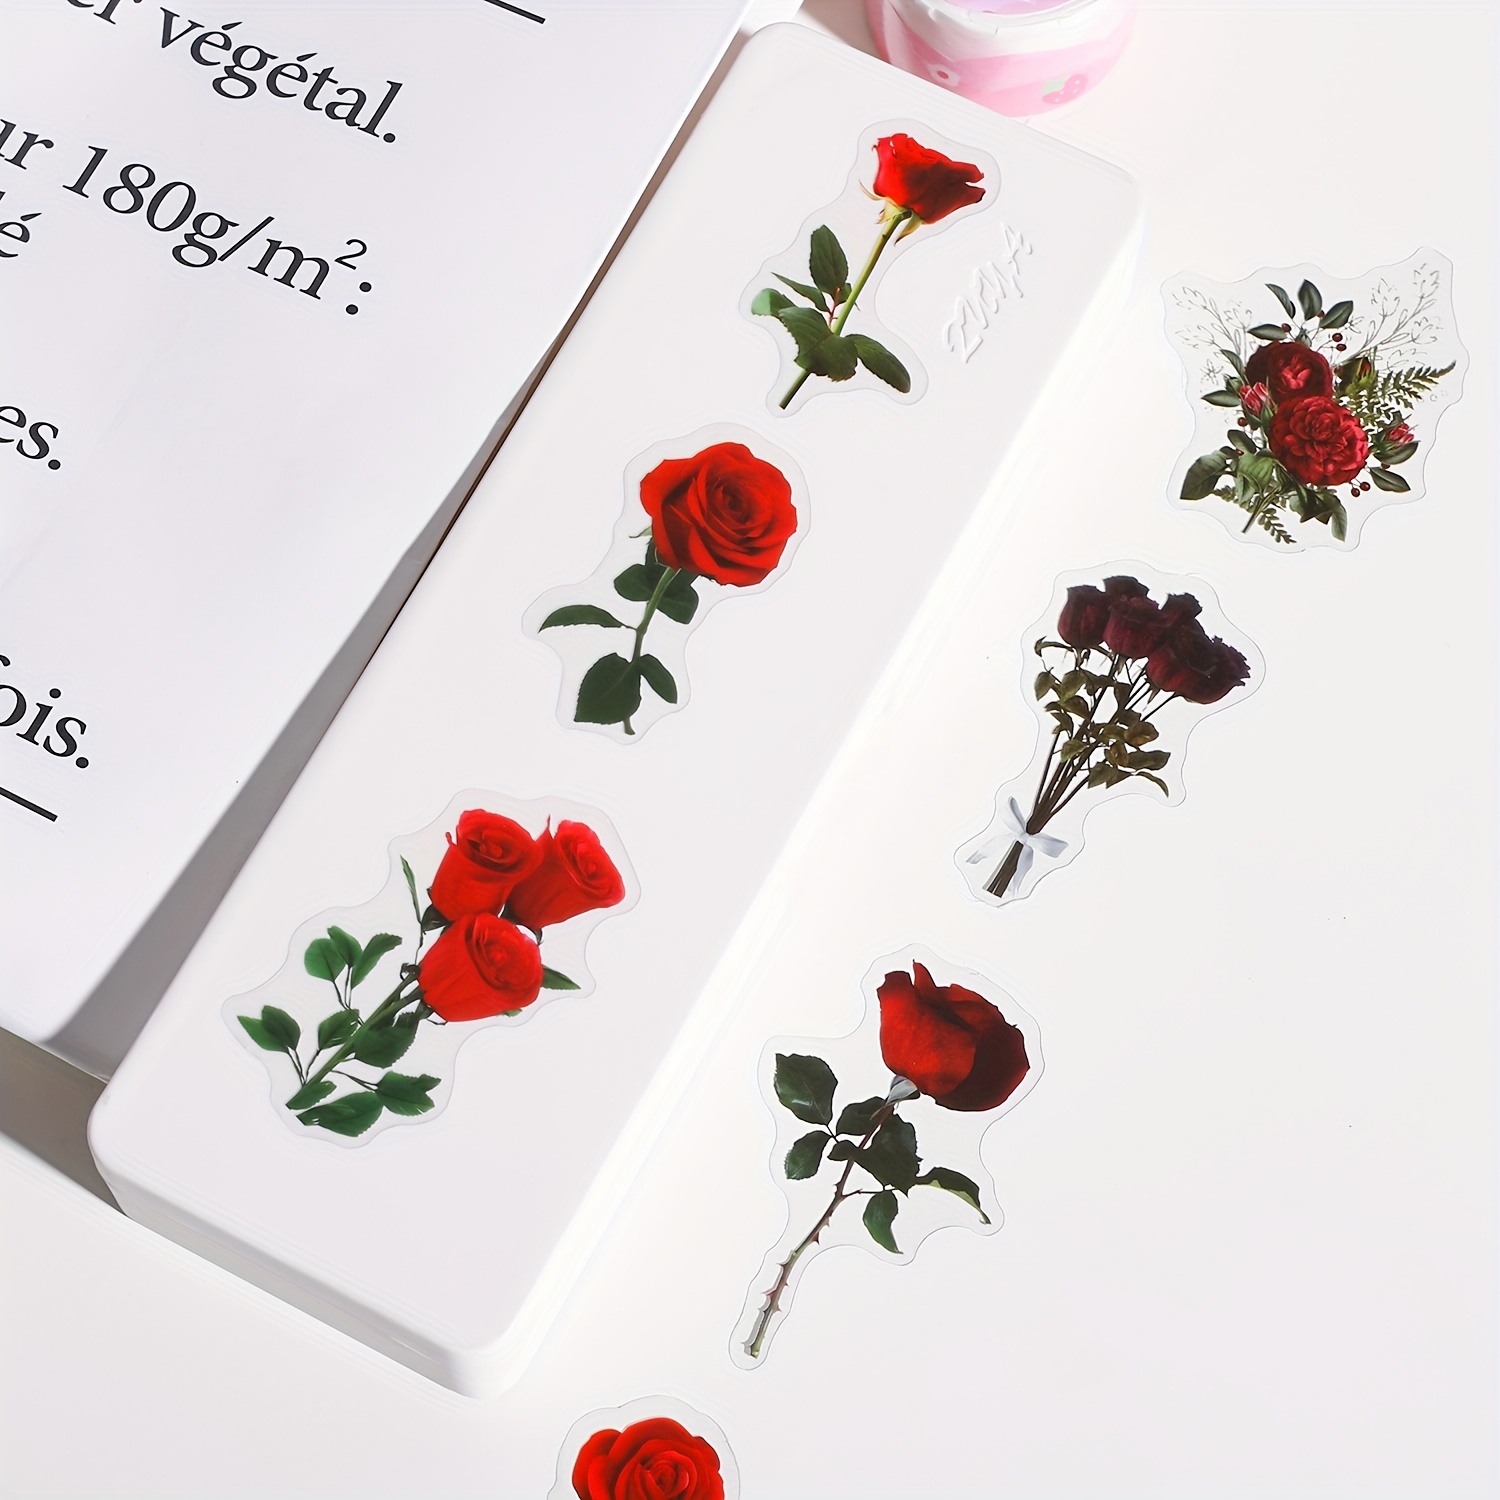 Aesthetic Flower Stickers, Vintage Flower Stickers